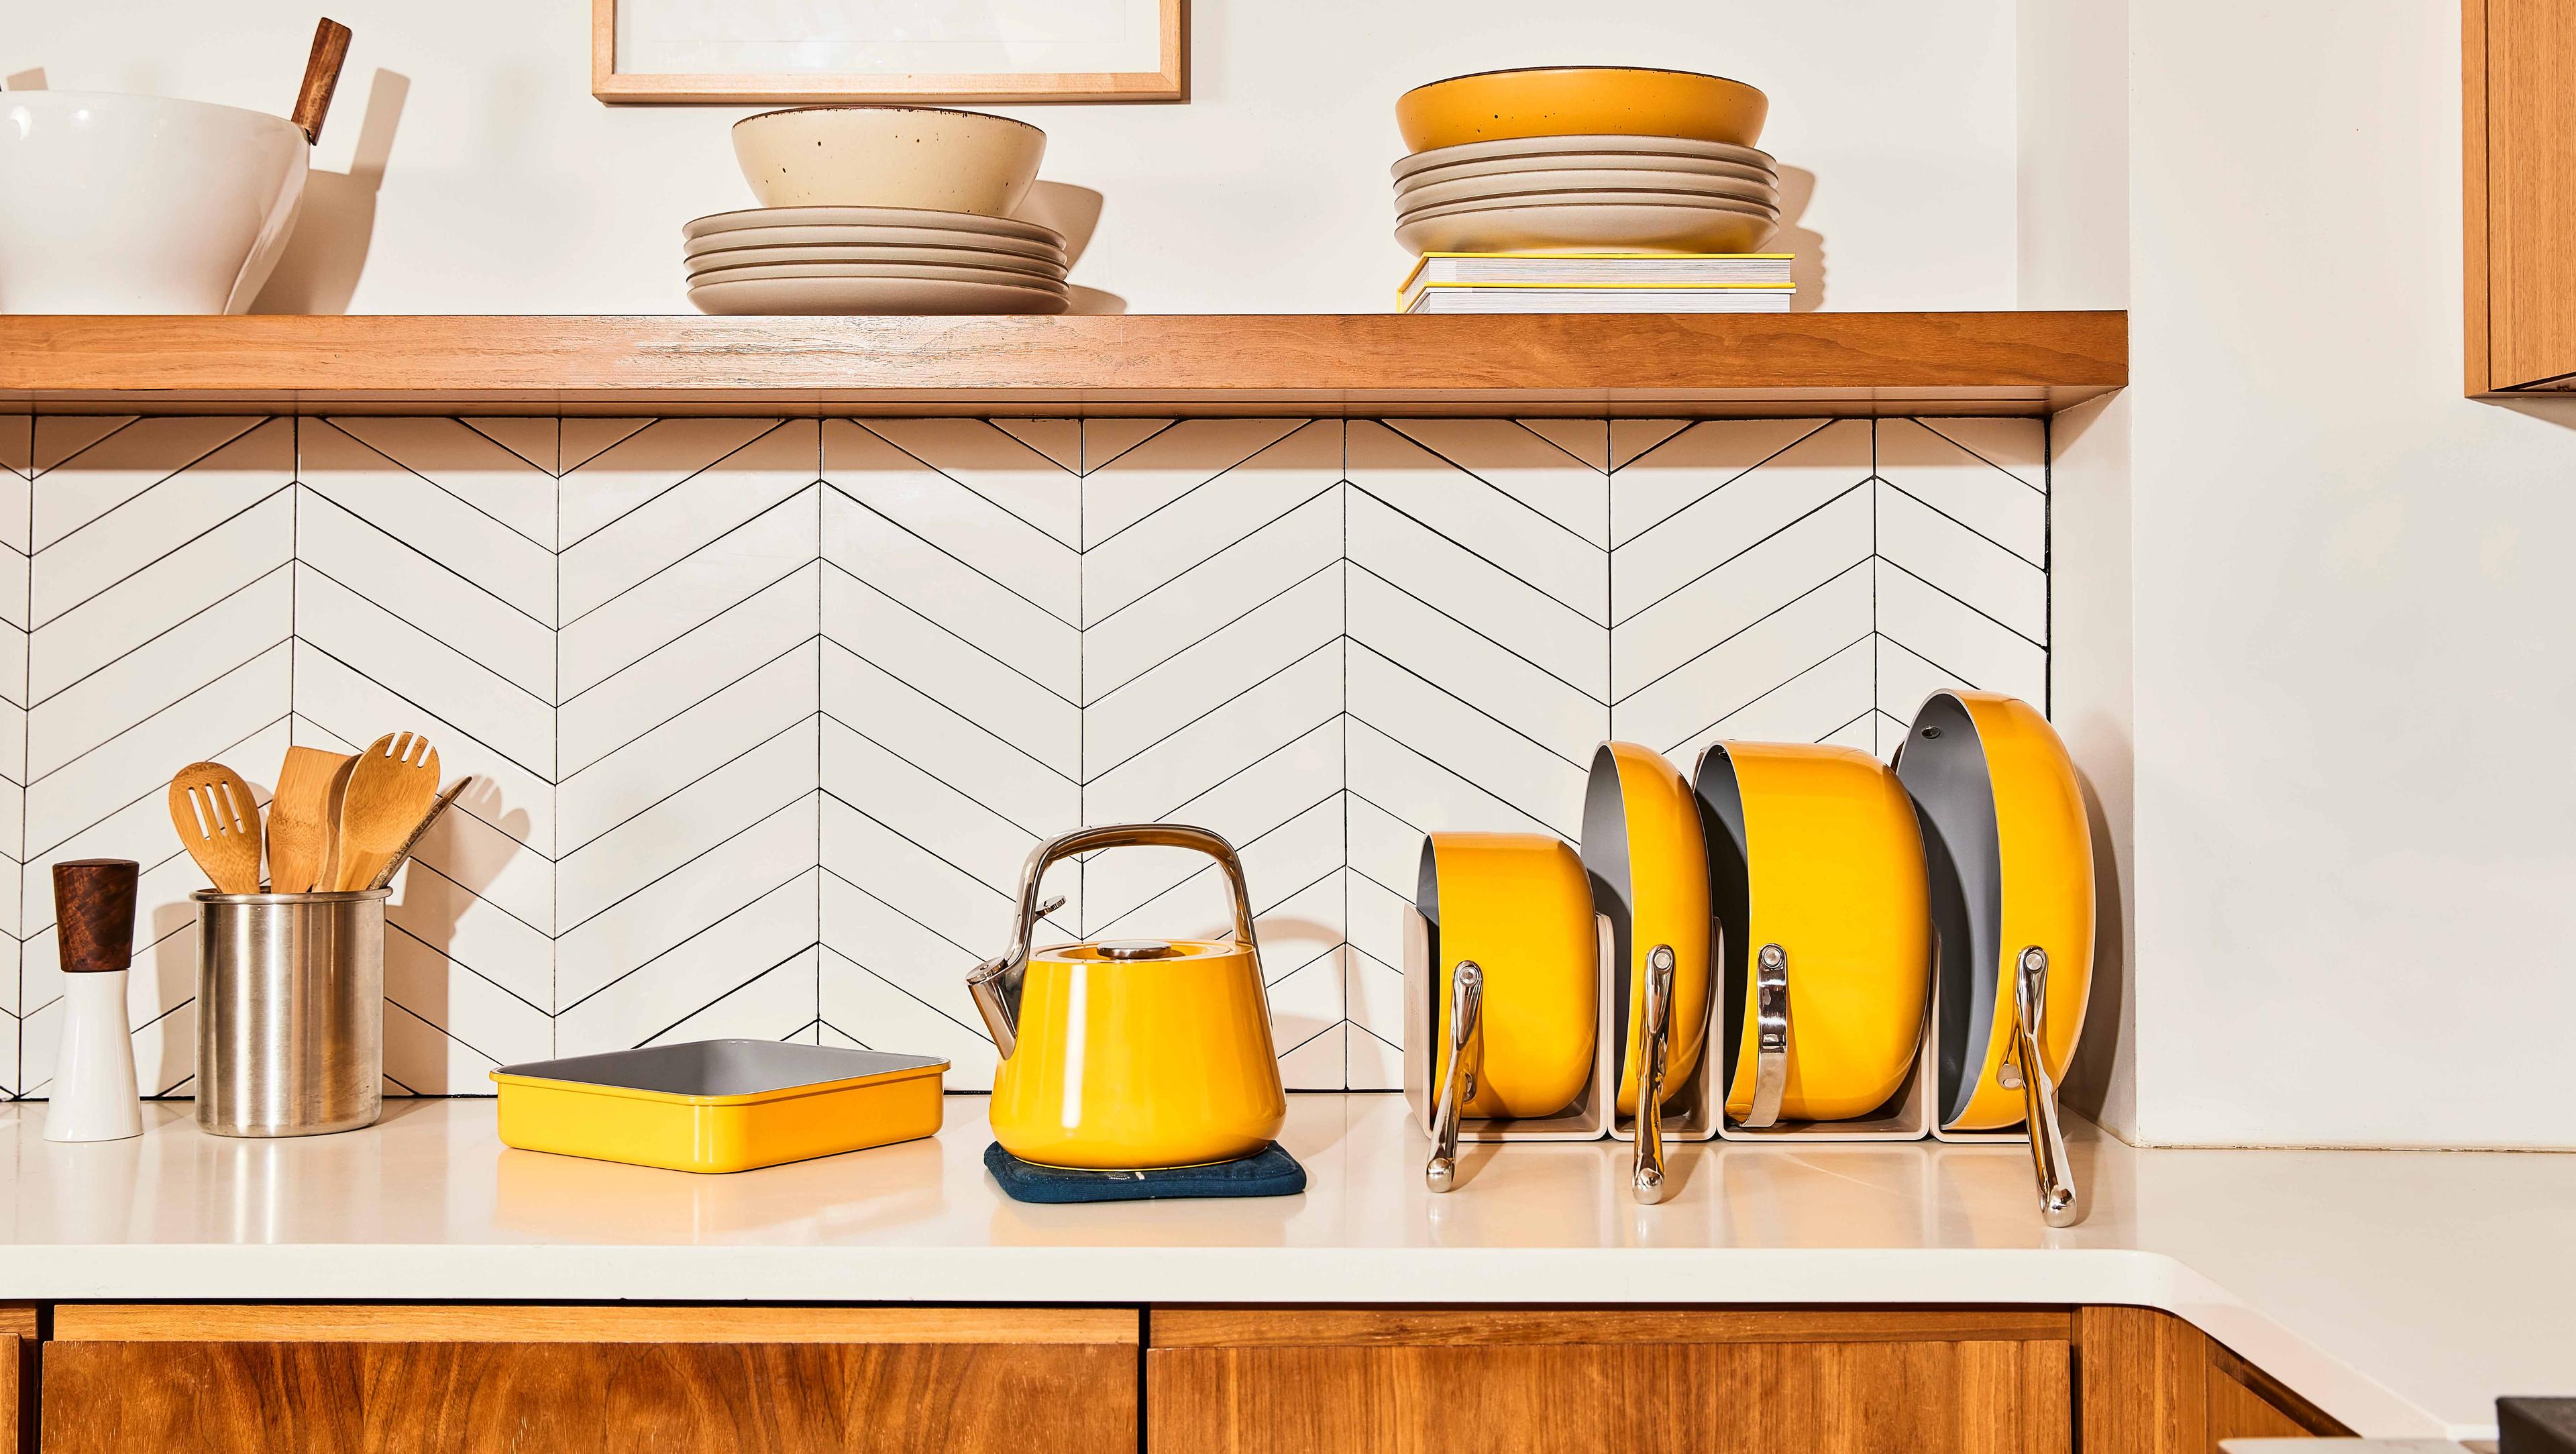 Set of matching yellow Caraway cookware on a kitchen countertop